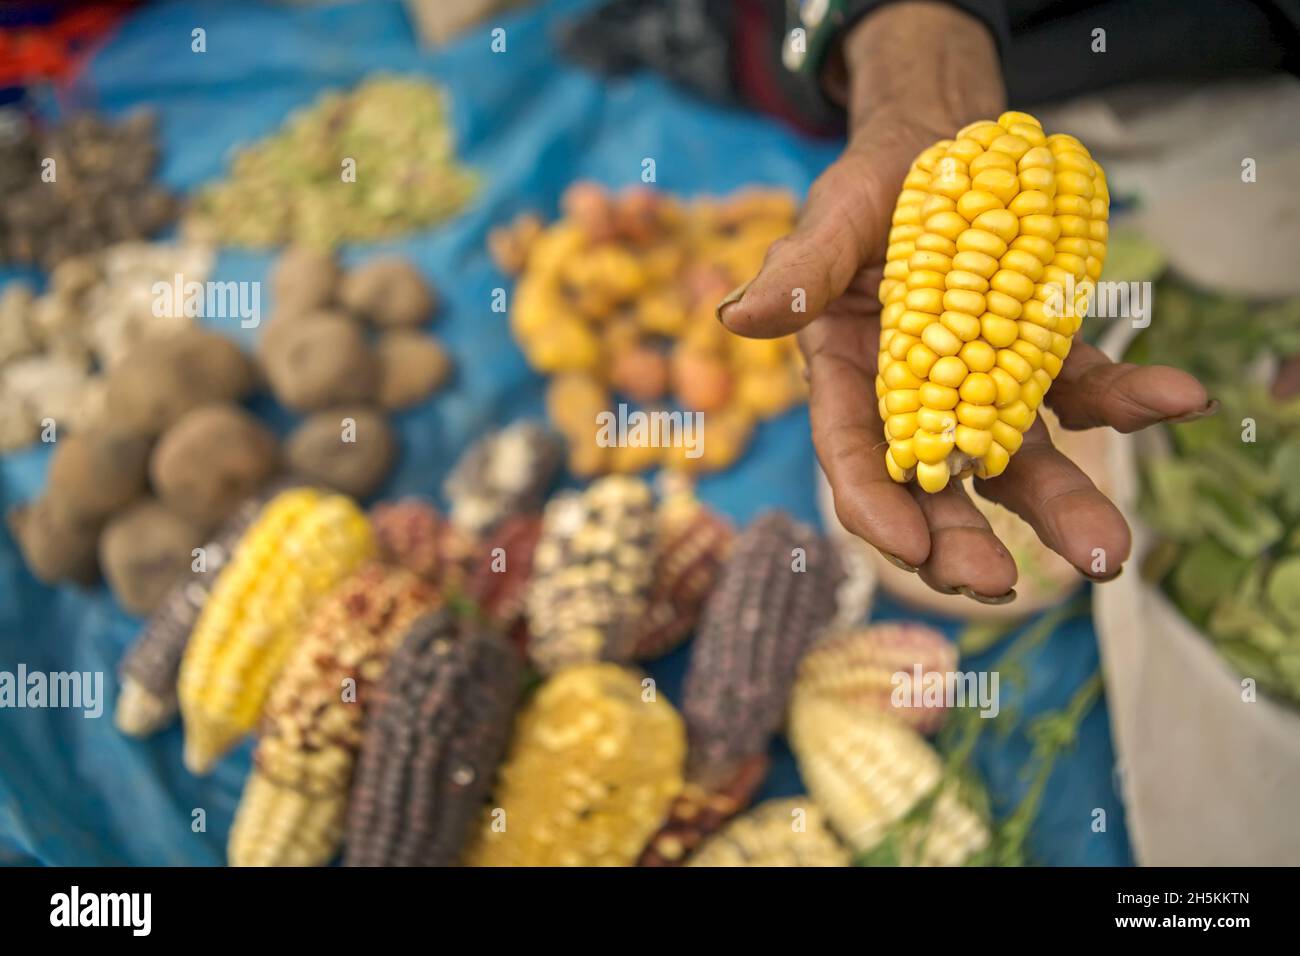 Corn in a vegetable vendor's hand at a market. Stock Photo